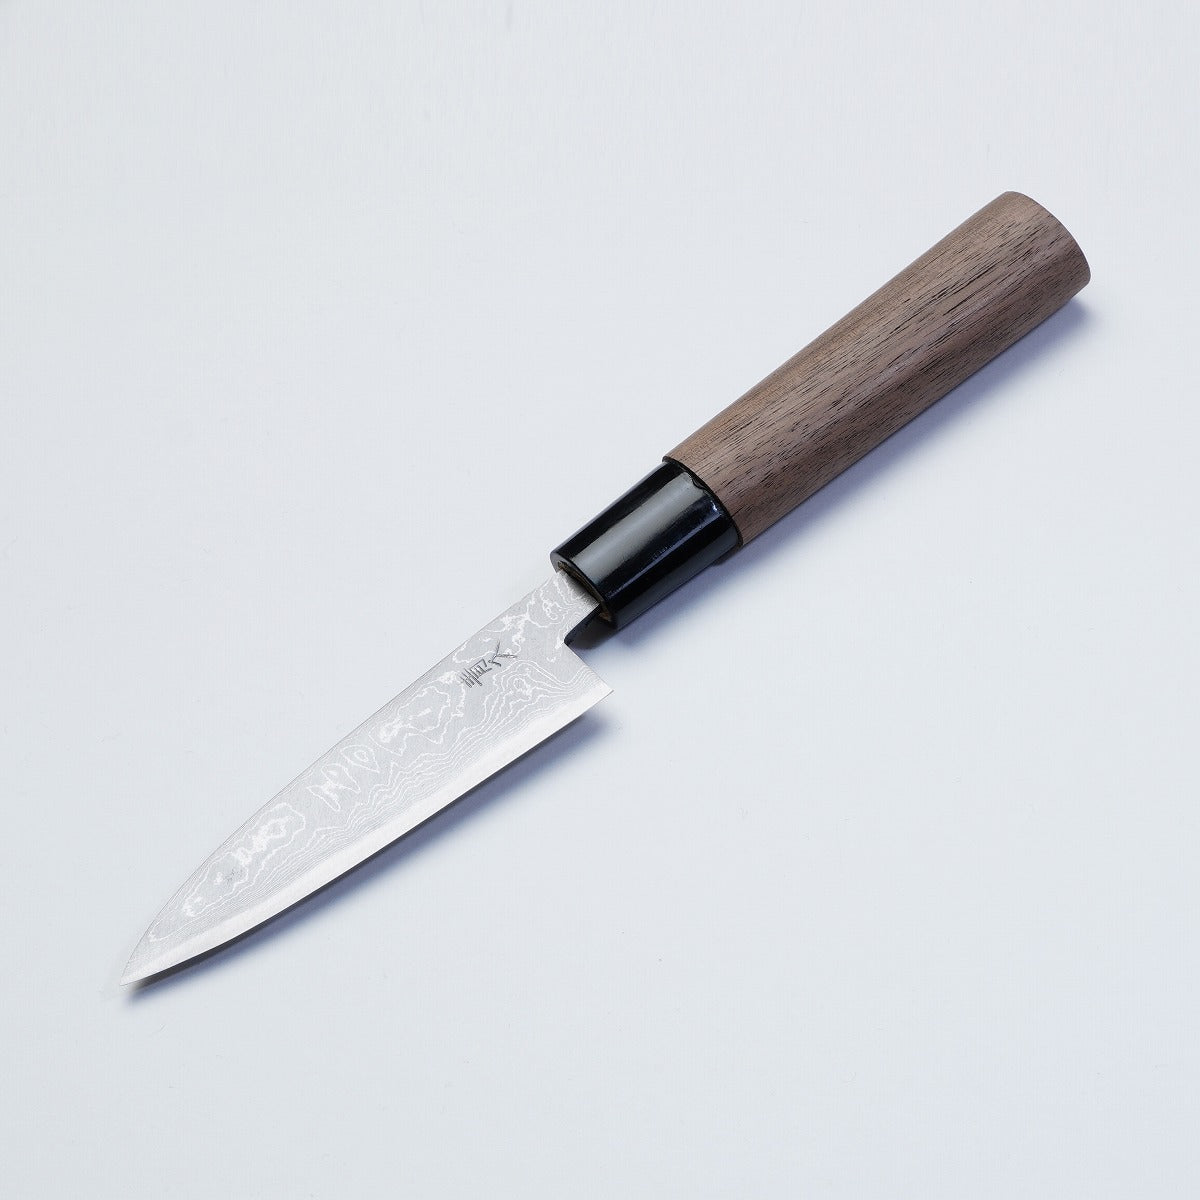 Paring Knife Aogami Steel No.2 Damascus, 105mm~120mm